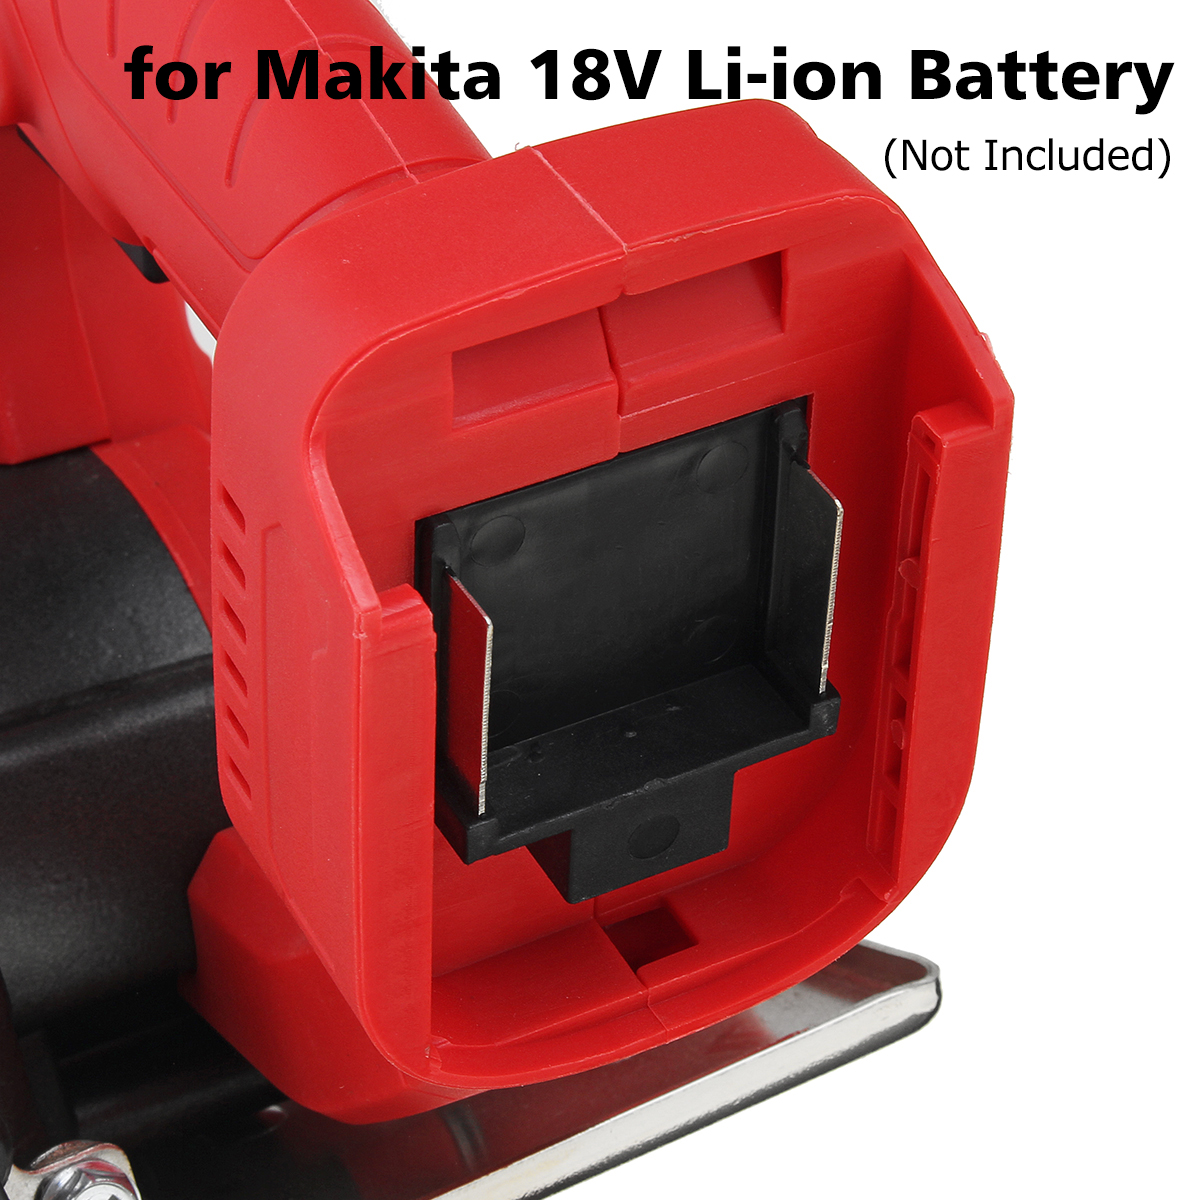 125mm-10800RPM-Multifunction-Circular-Saw-Scale-Bevel-Cutting-Power-Tools-For-18V-Makita-Battery-1759378-5